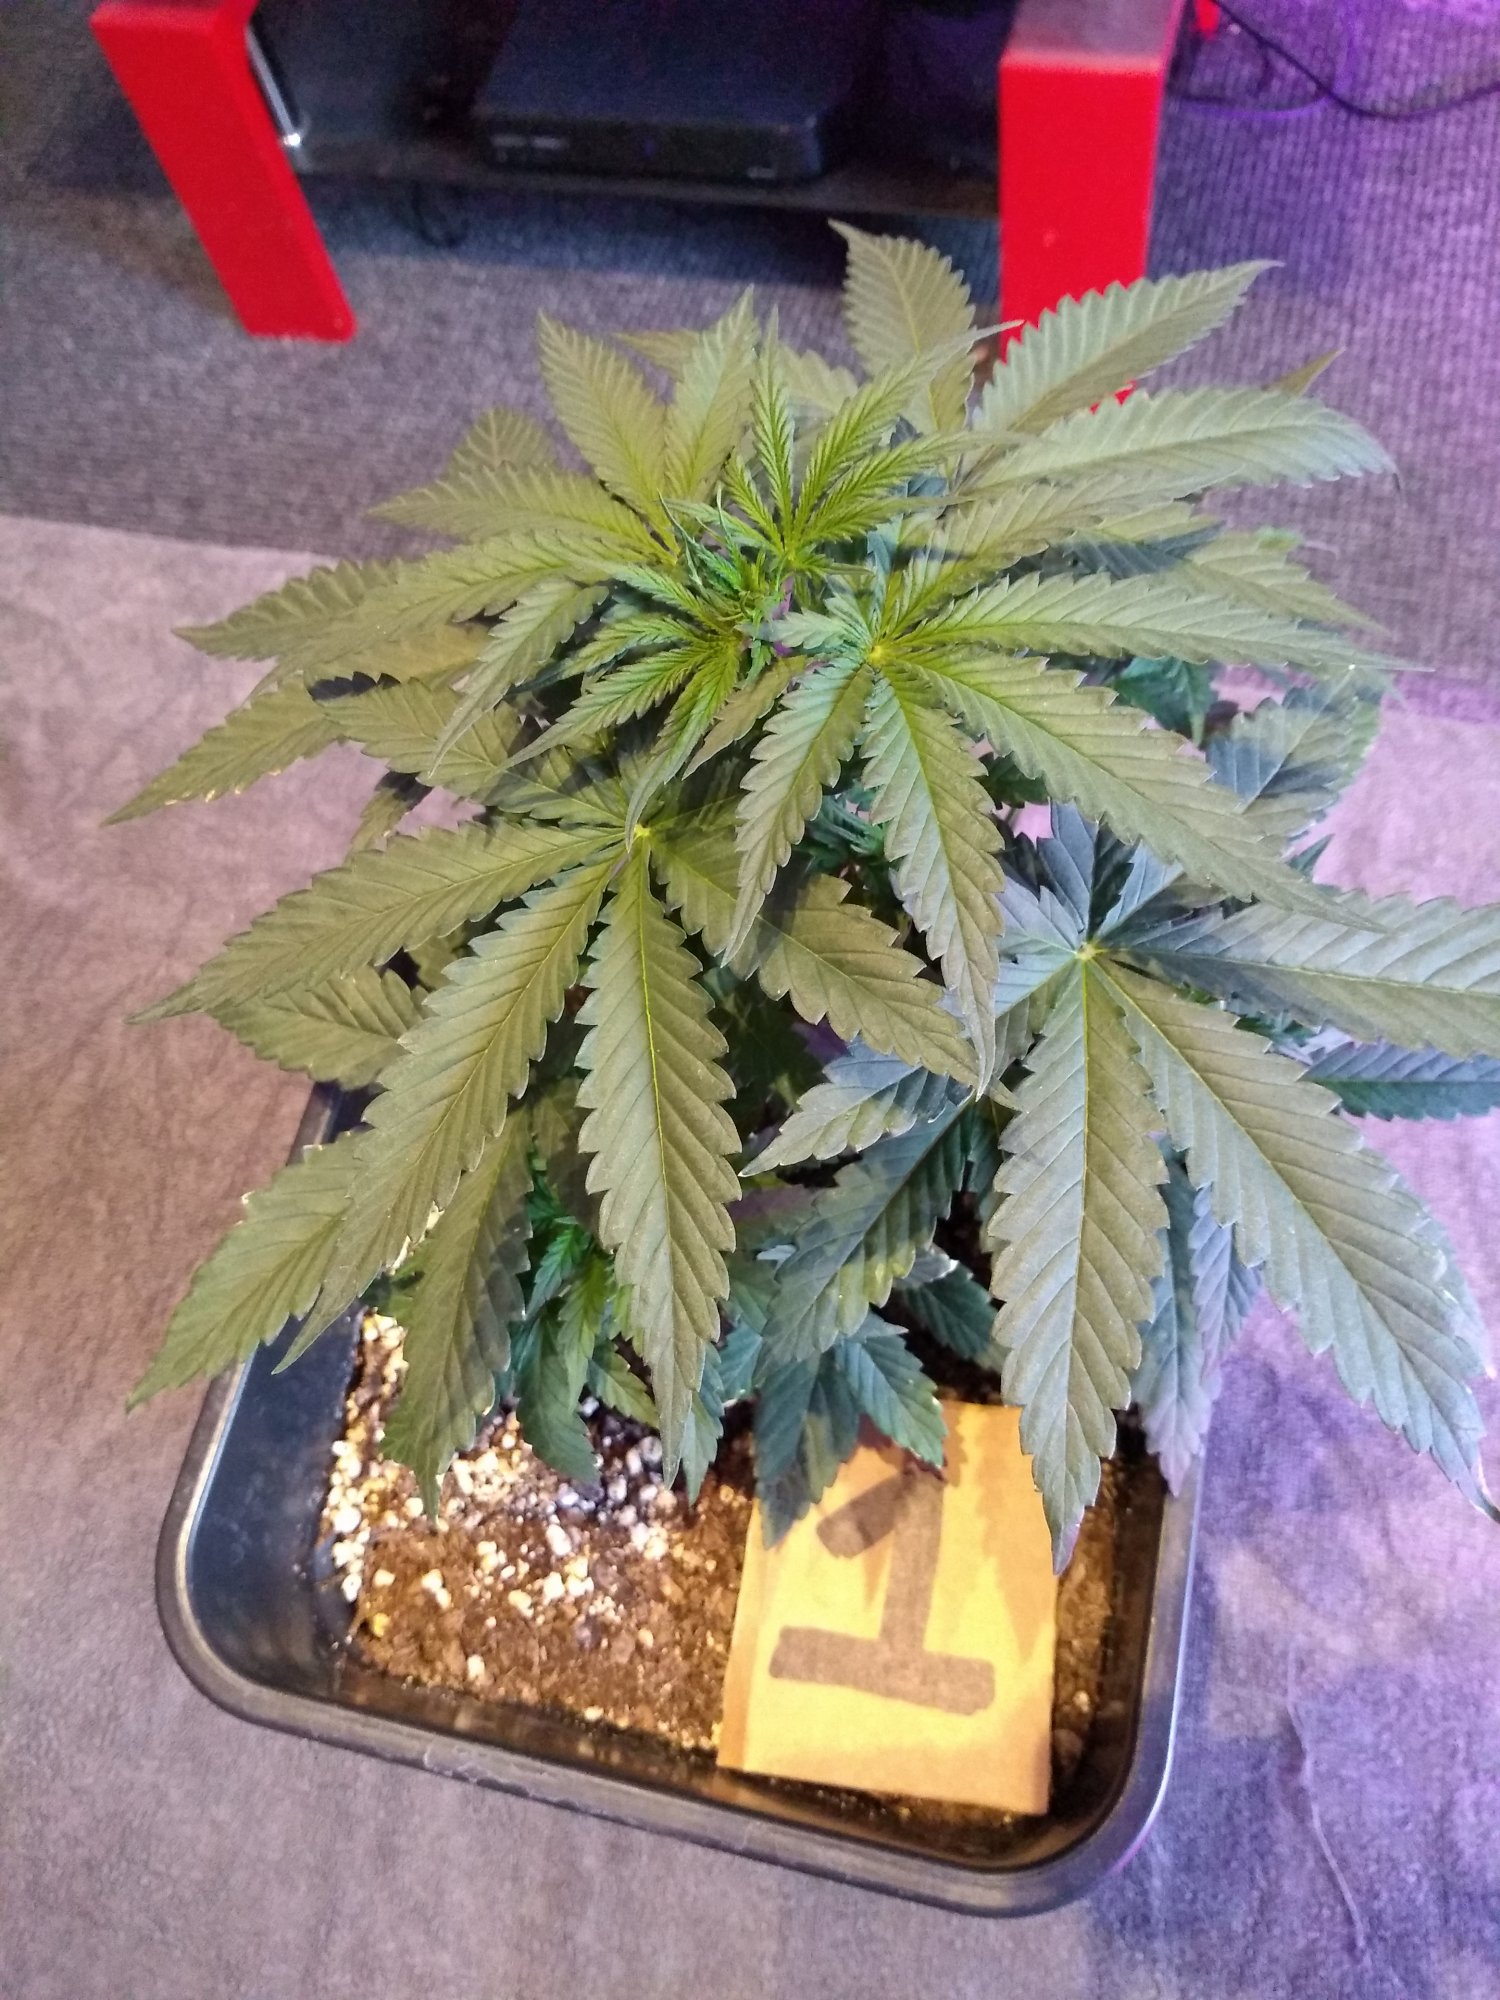 New grower   mistakes have been made 3